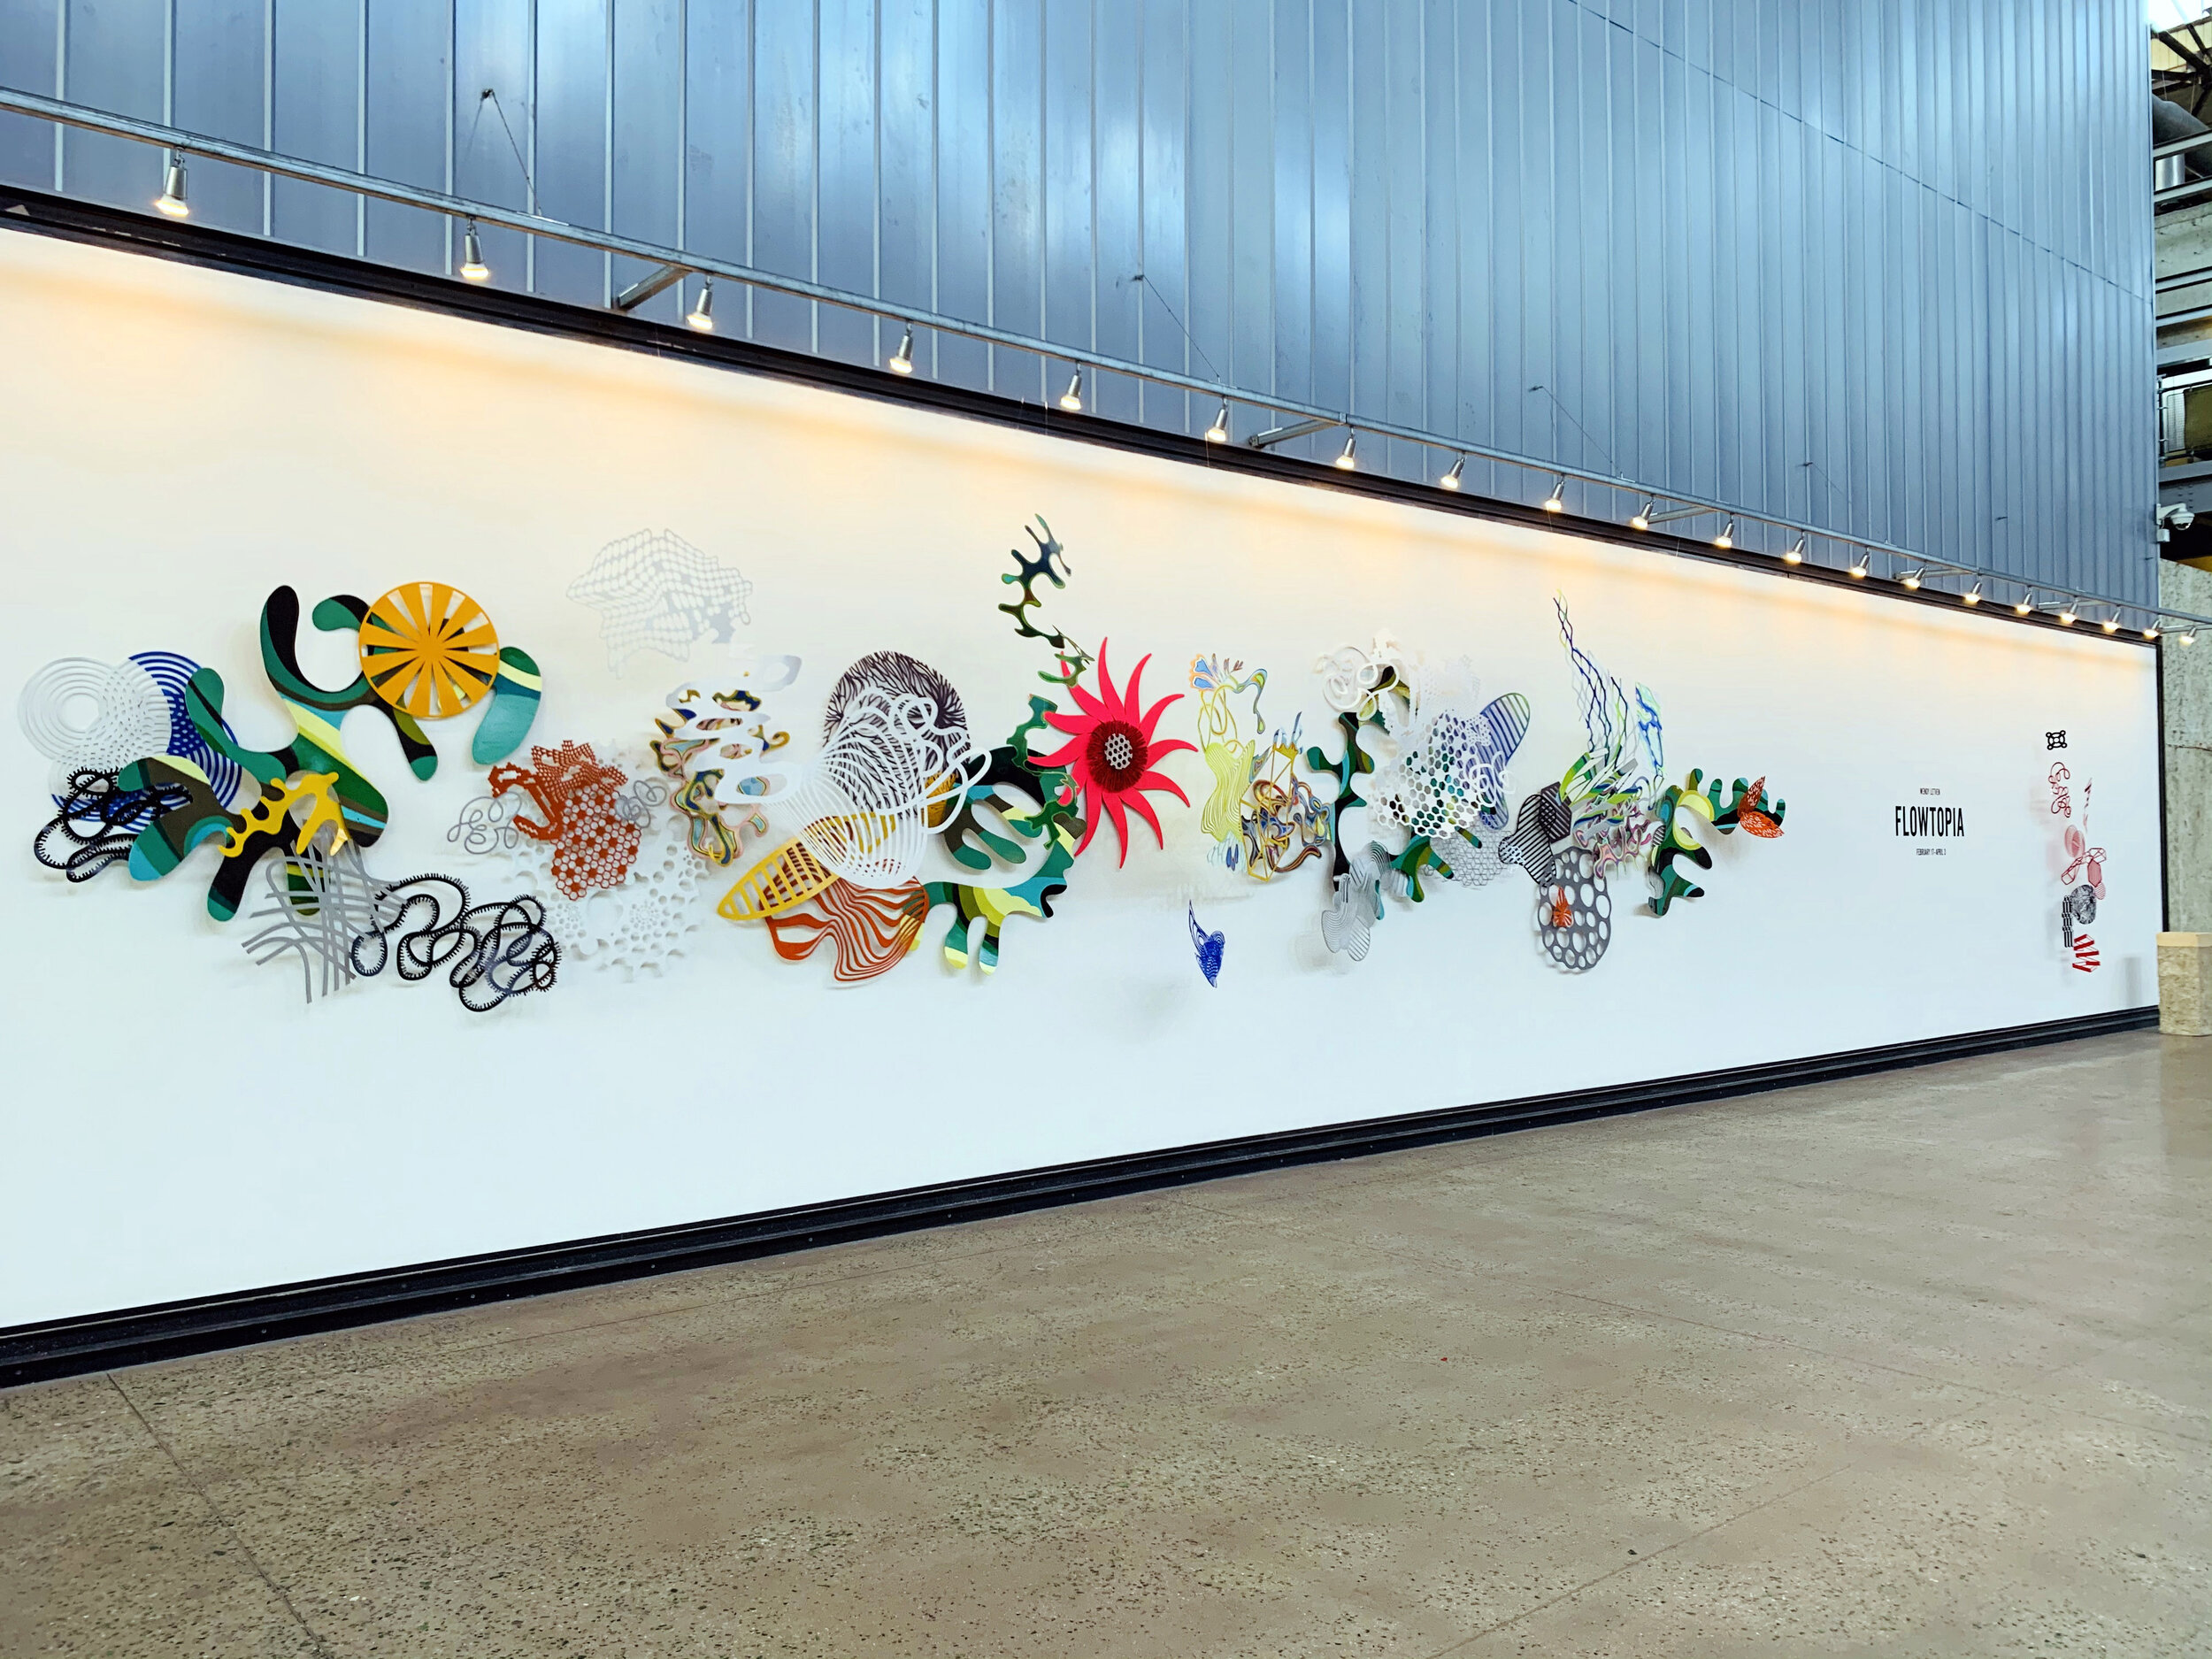  Wendy Letven,  Flowtopia II,  2020. Site-specific installation, Urban Outfitters Headquarters 